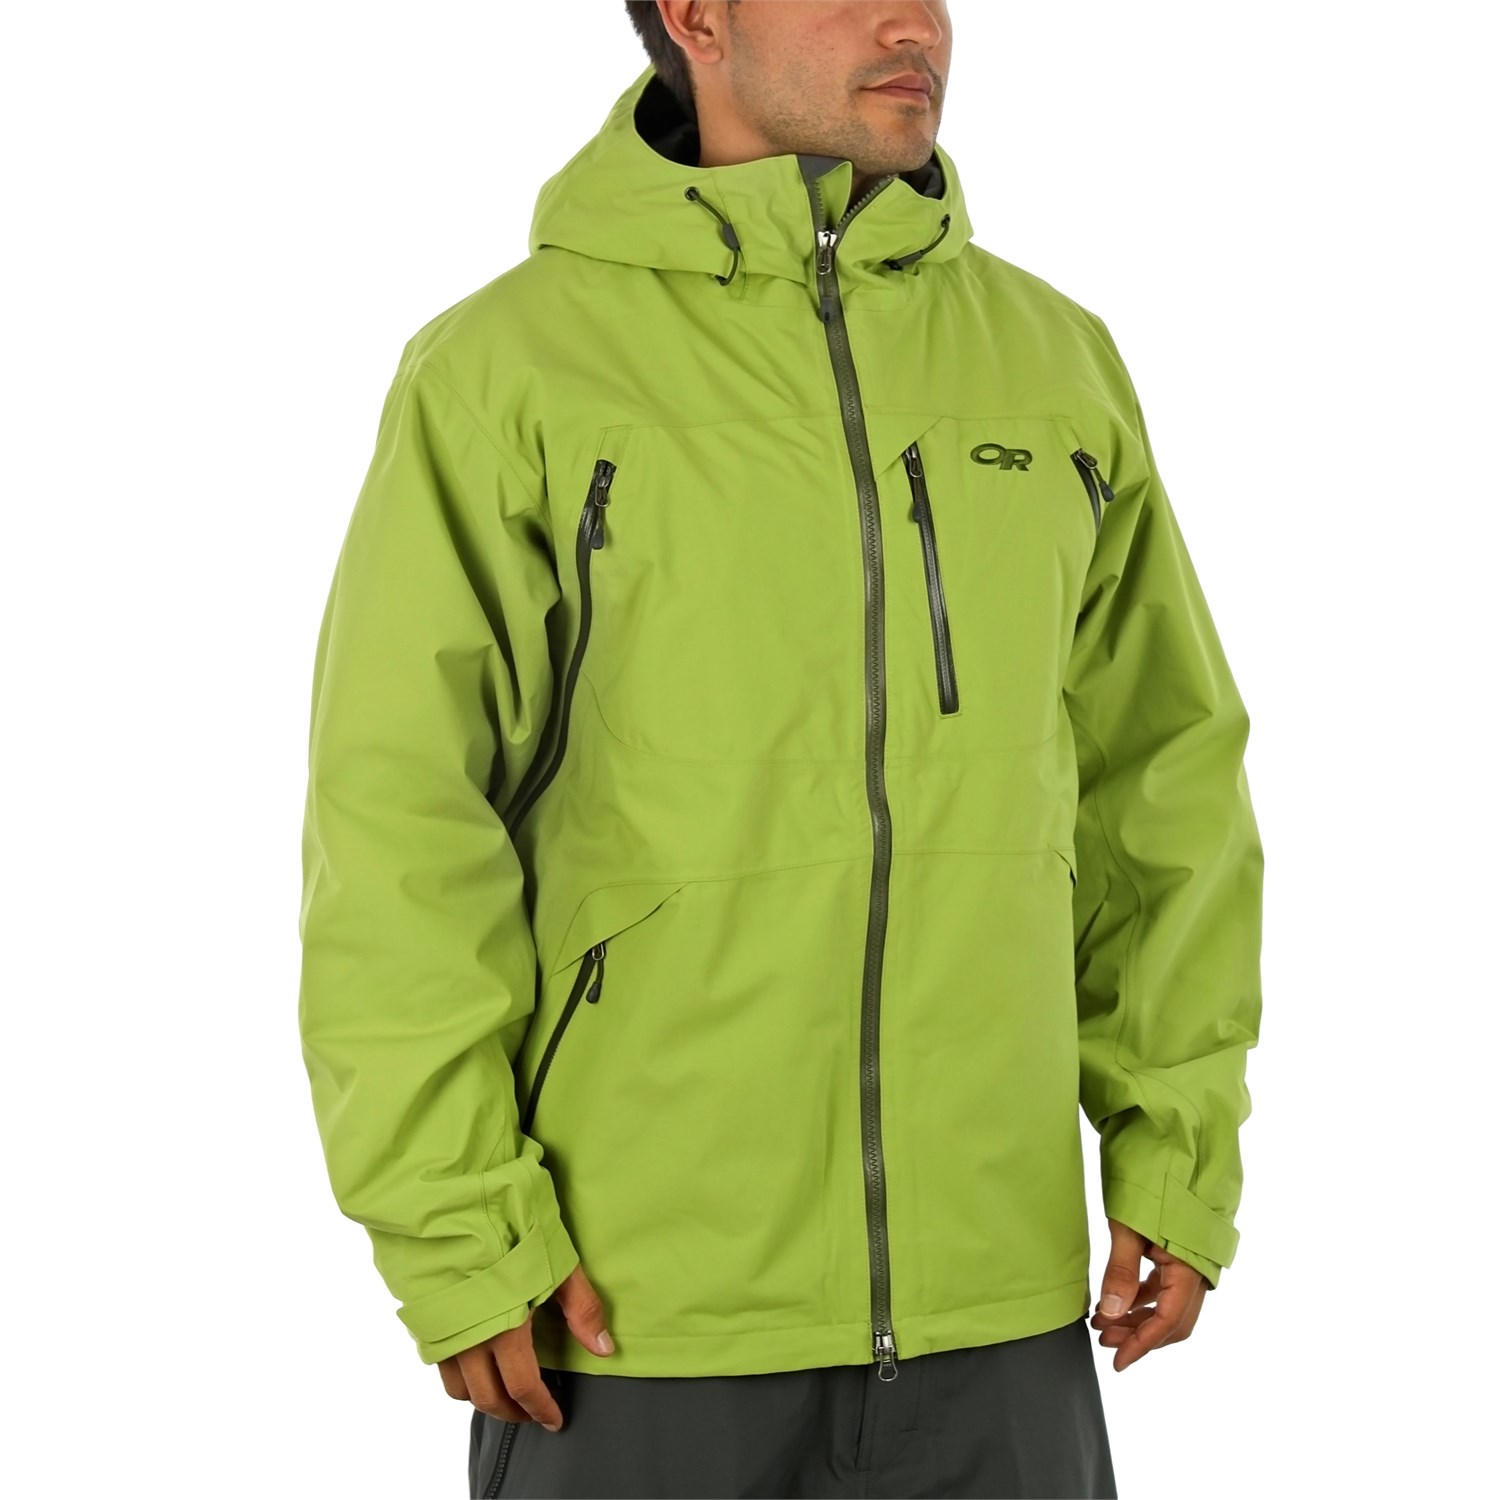 Outdoor Research Axcess Jacket | evo